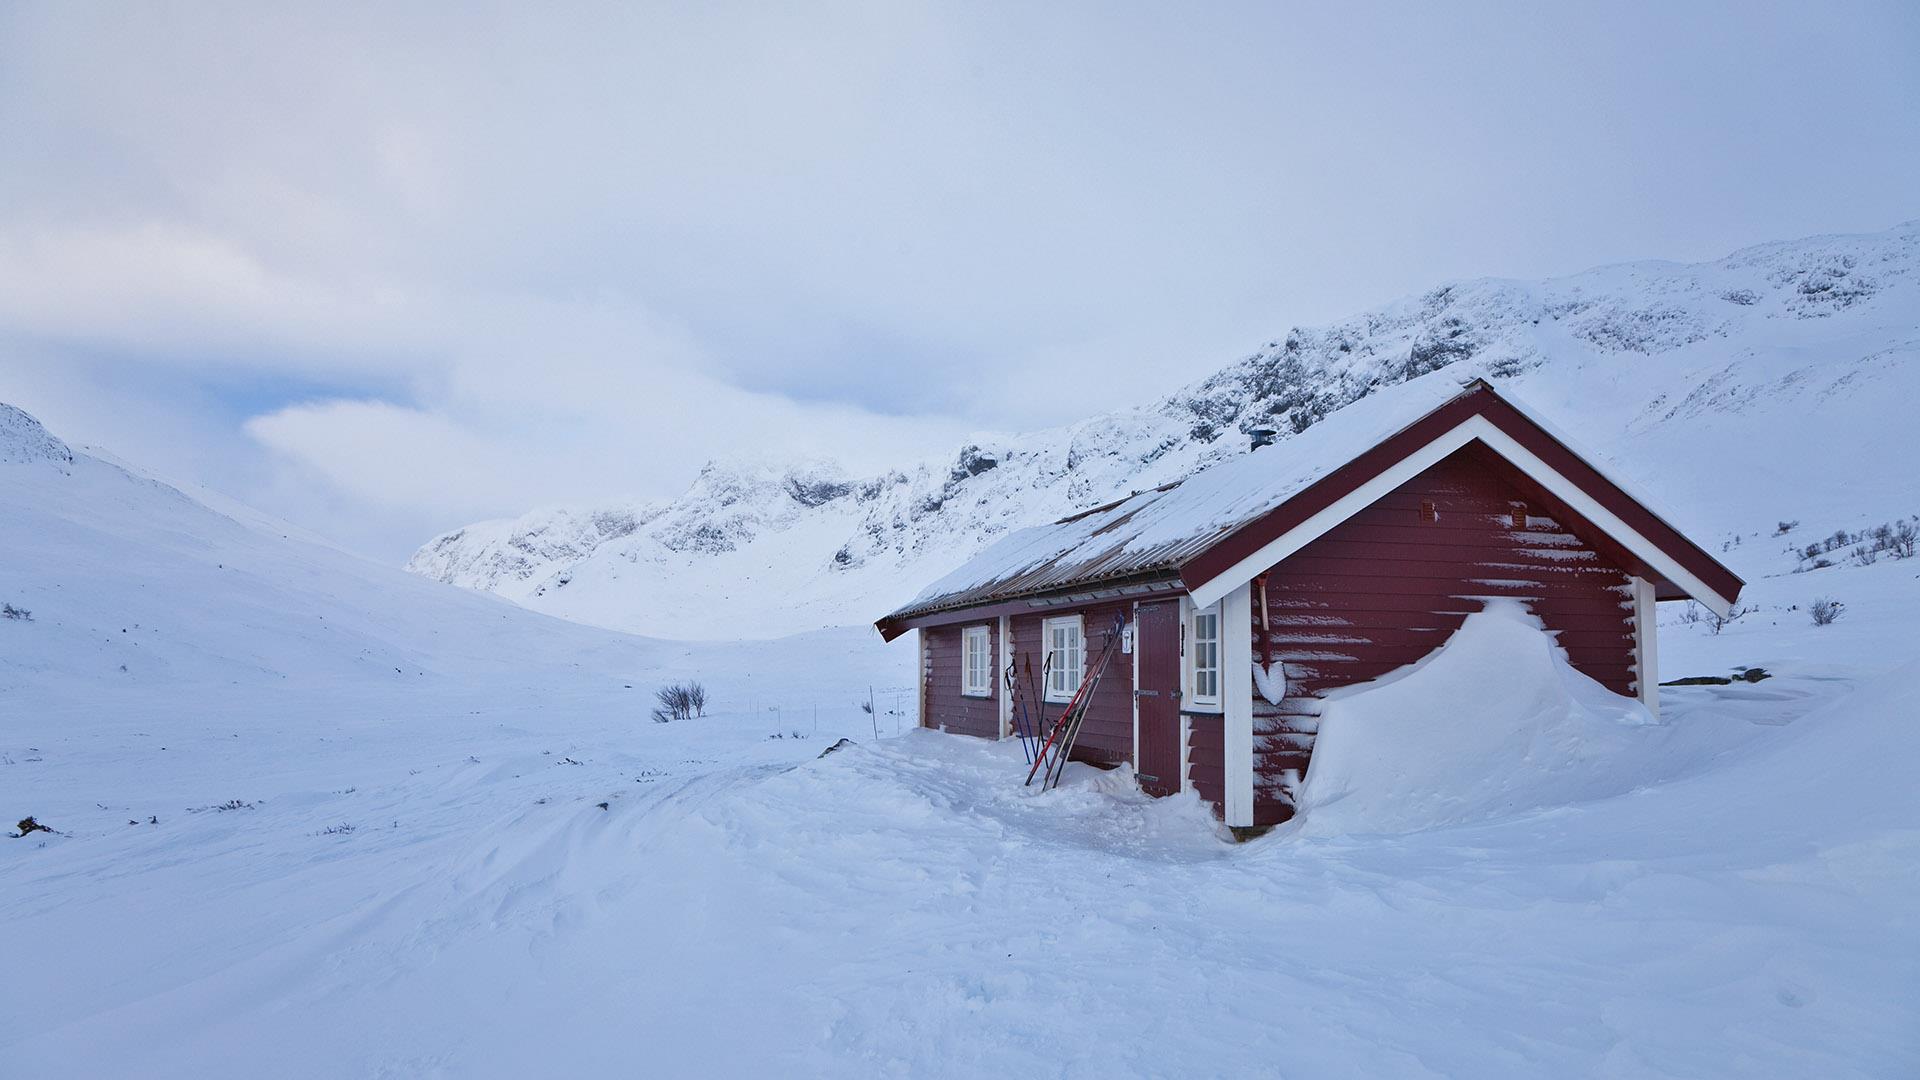 A dark red cabin in a mountain valley at winter. Flat light, grey skies and snow.